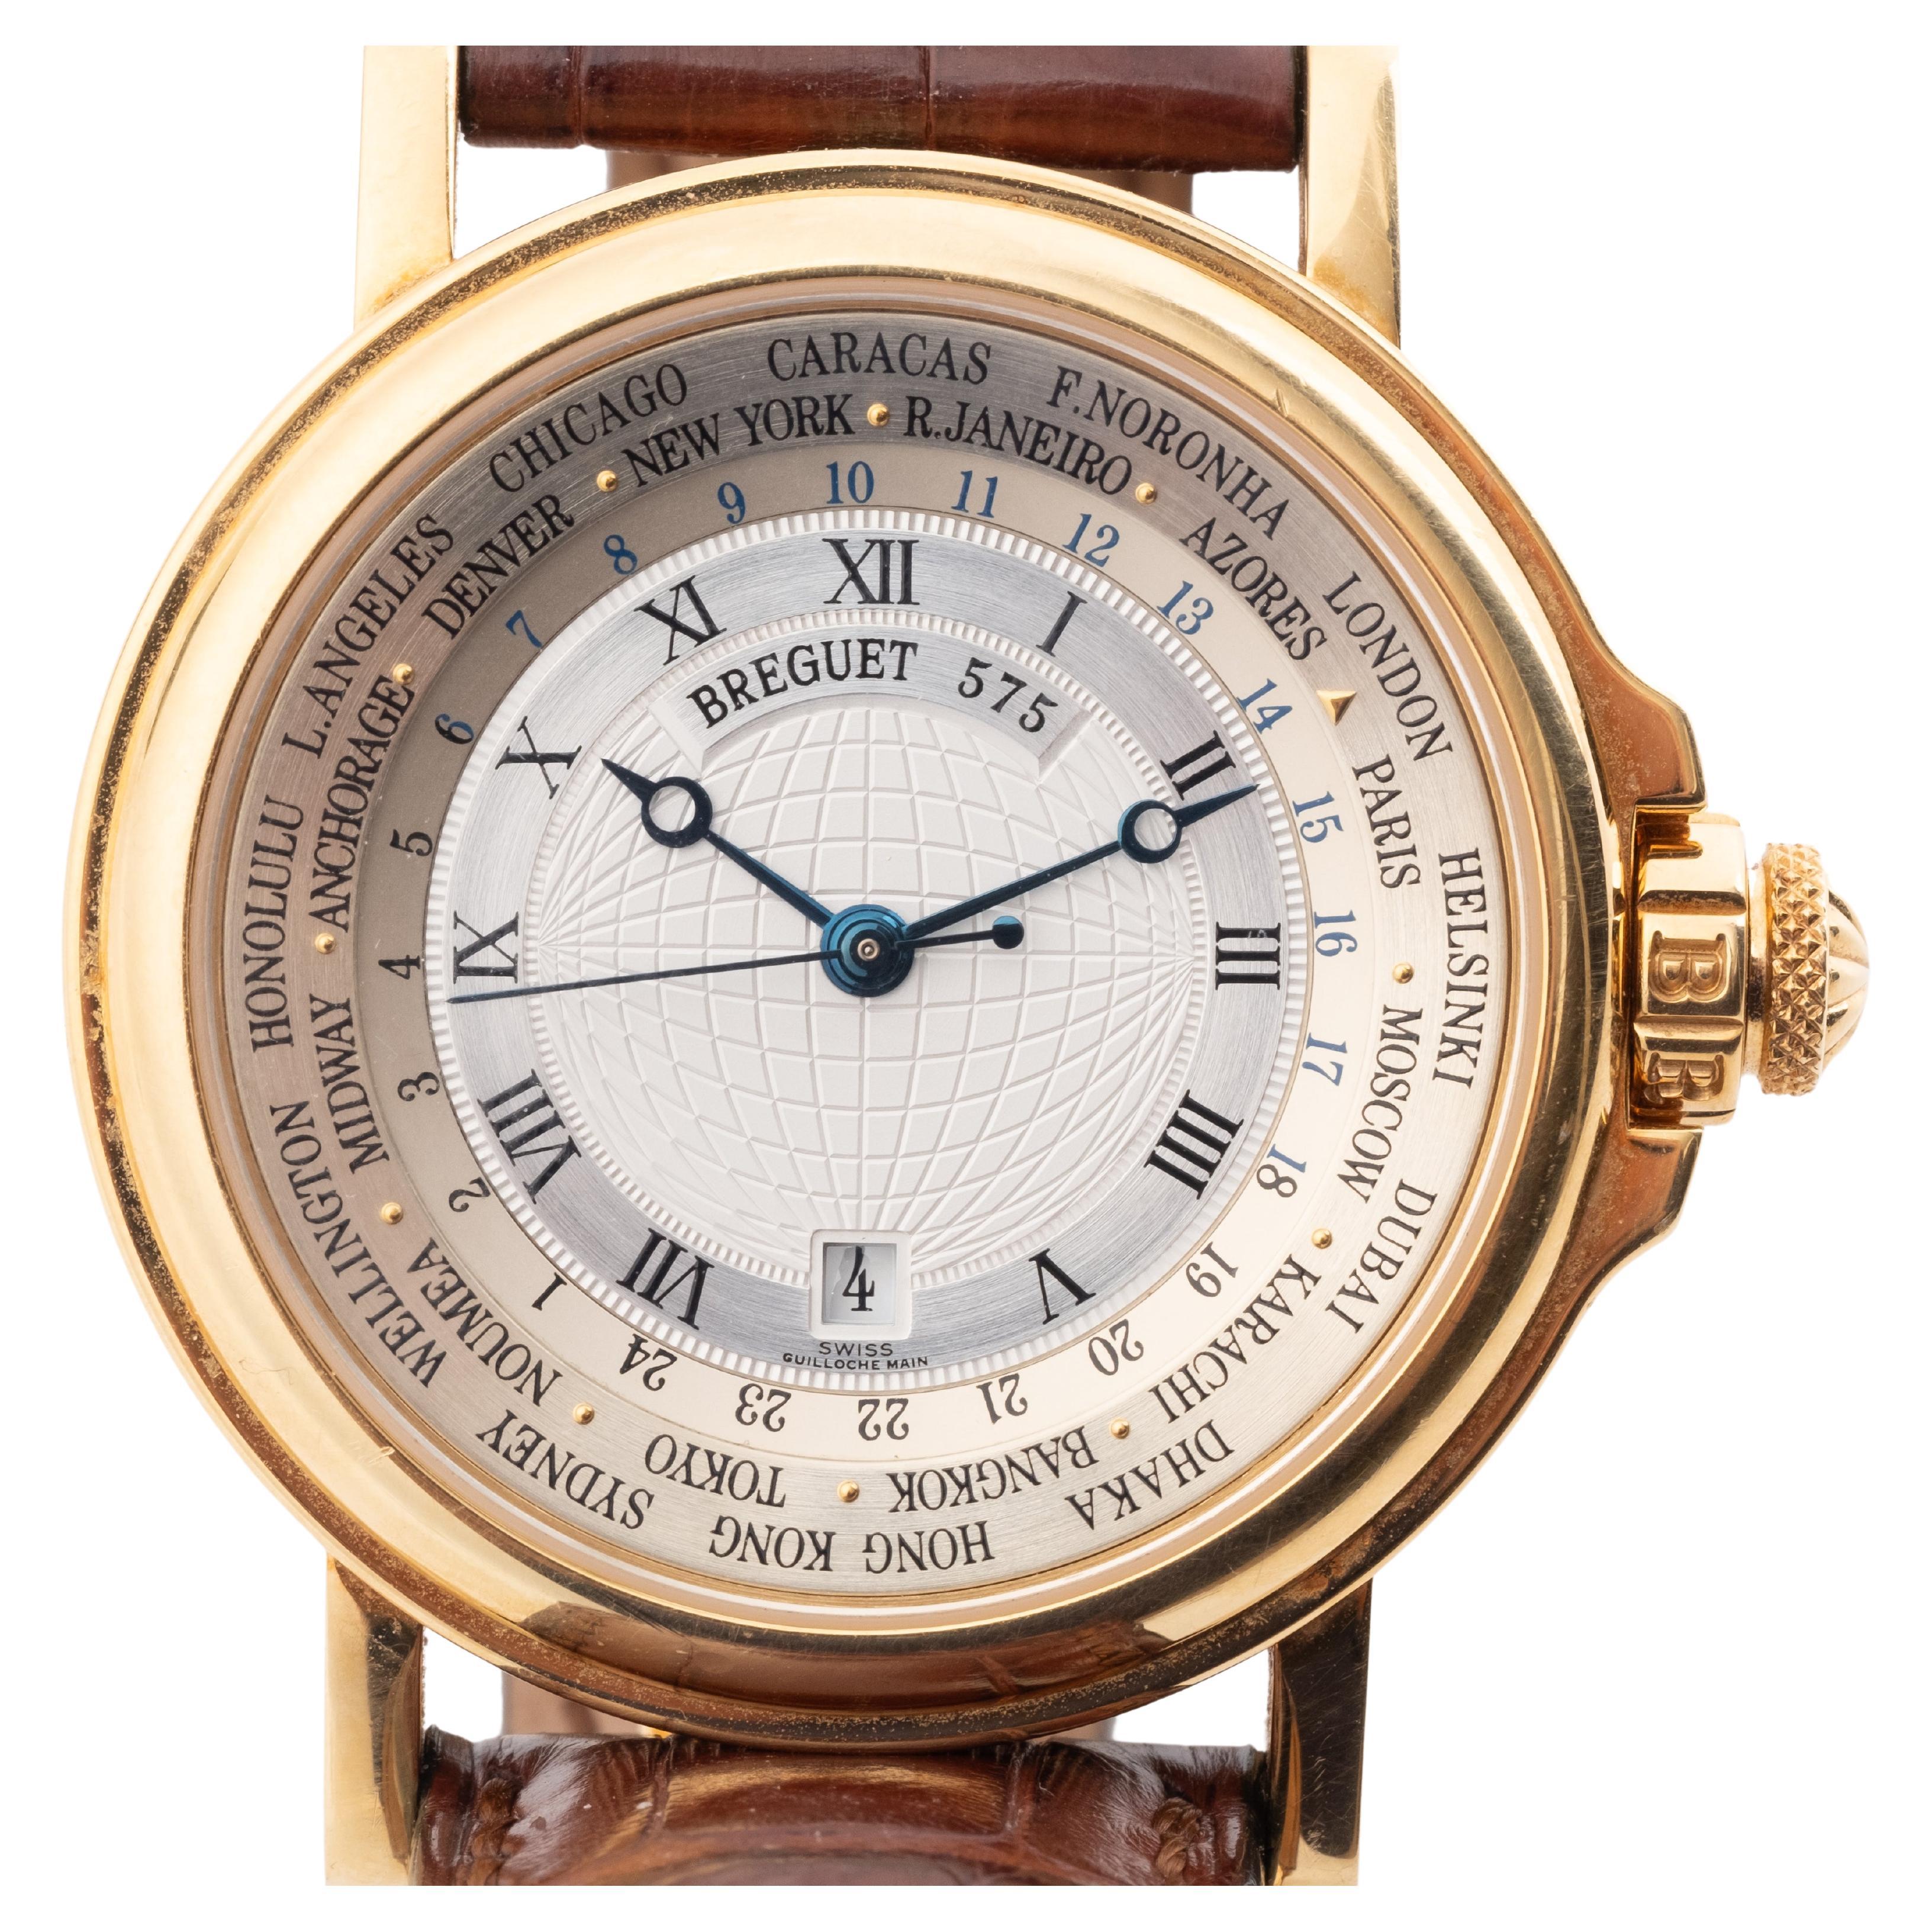 This wristwatch by Breguet, model Marine,World Time  reference 3700, dates back to around the year 2000. It features a 25-jewel Cal.563 automatic winding movement. The dial is silver, adorned with an engraved center reserve and an outer rotating